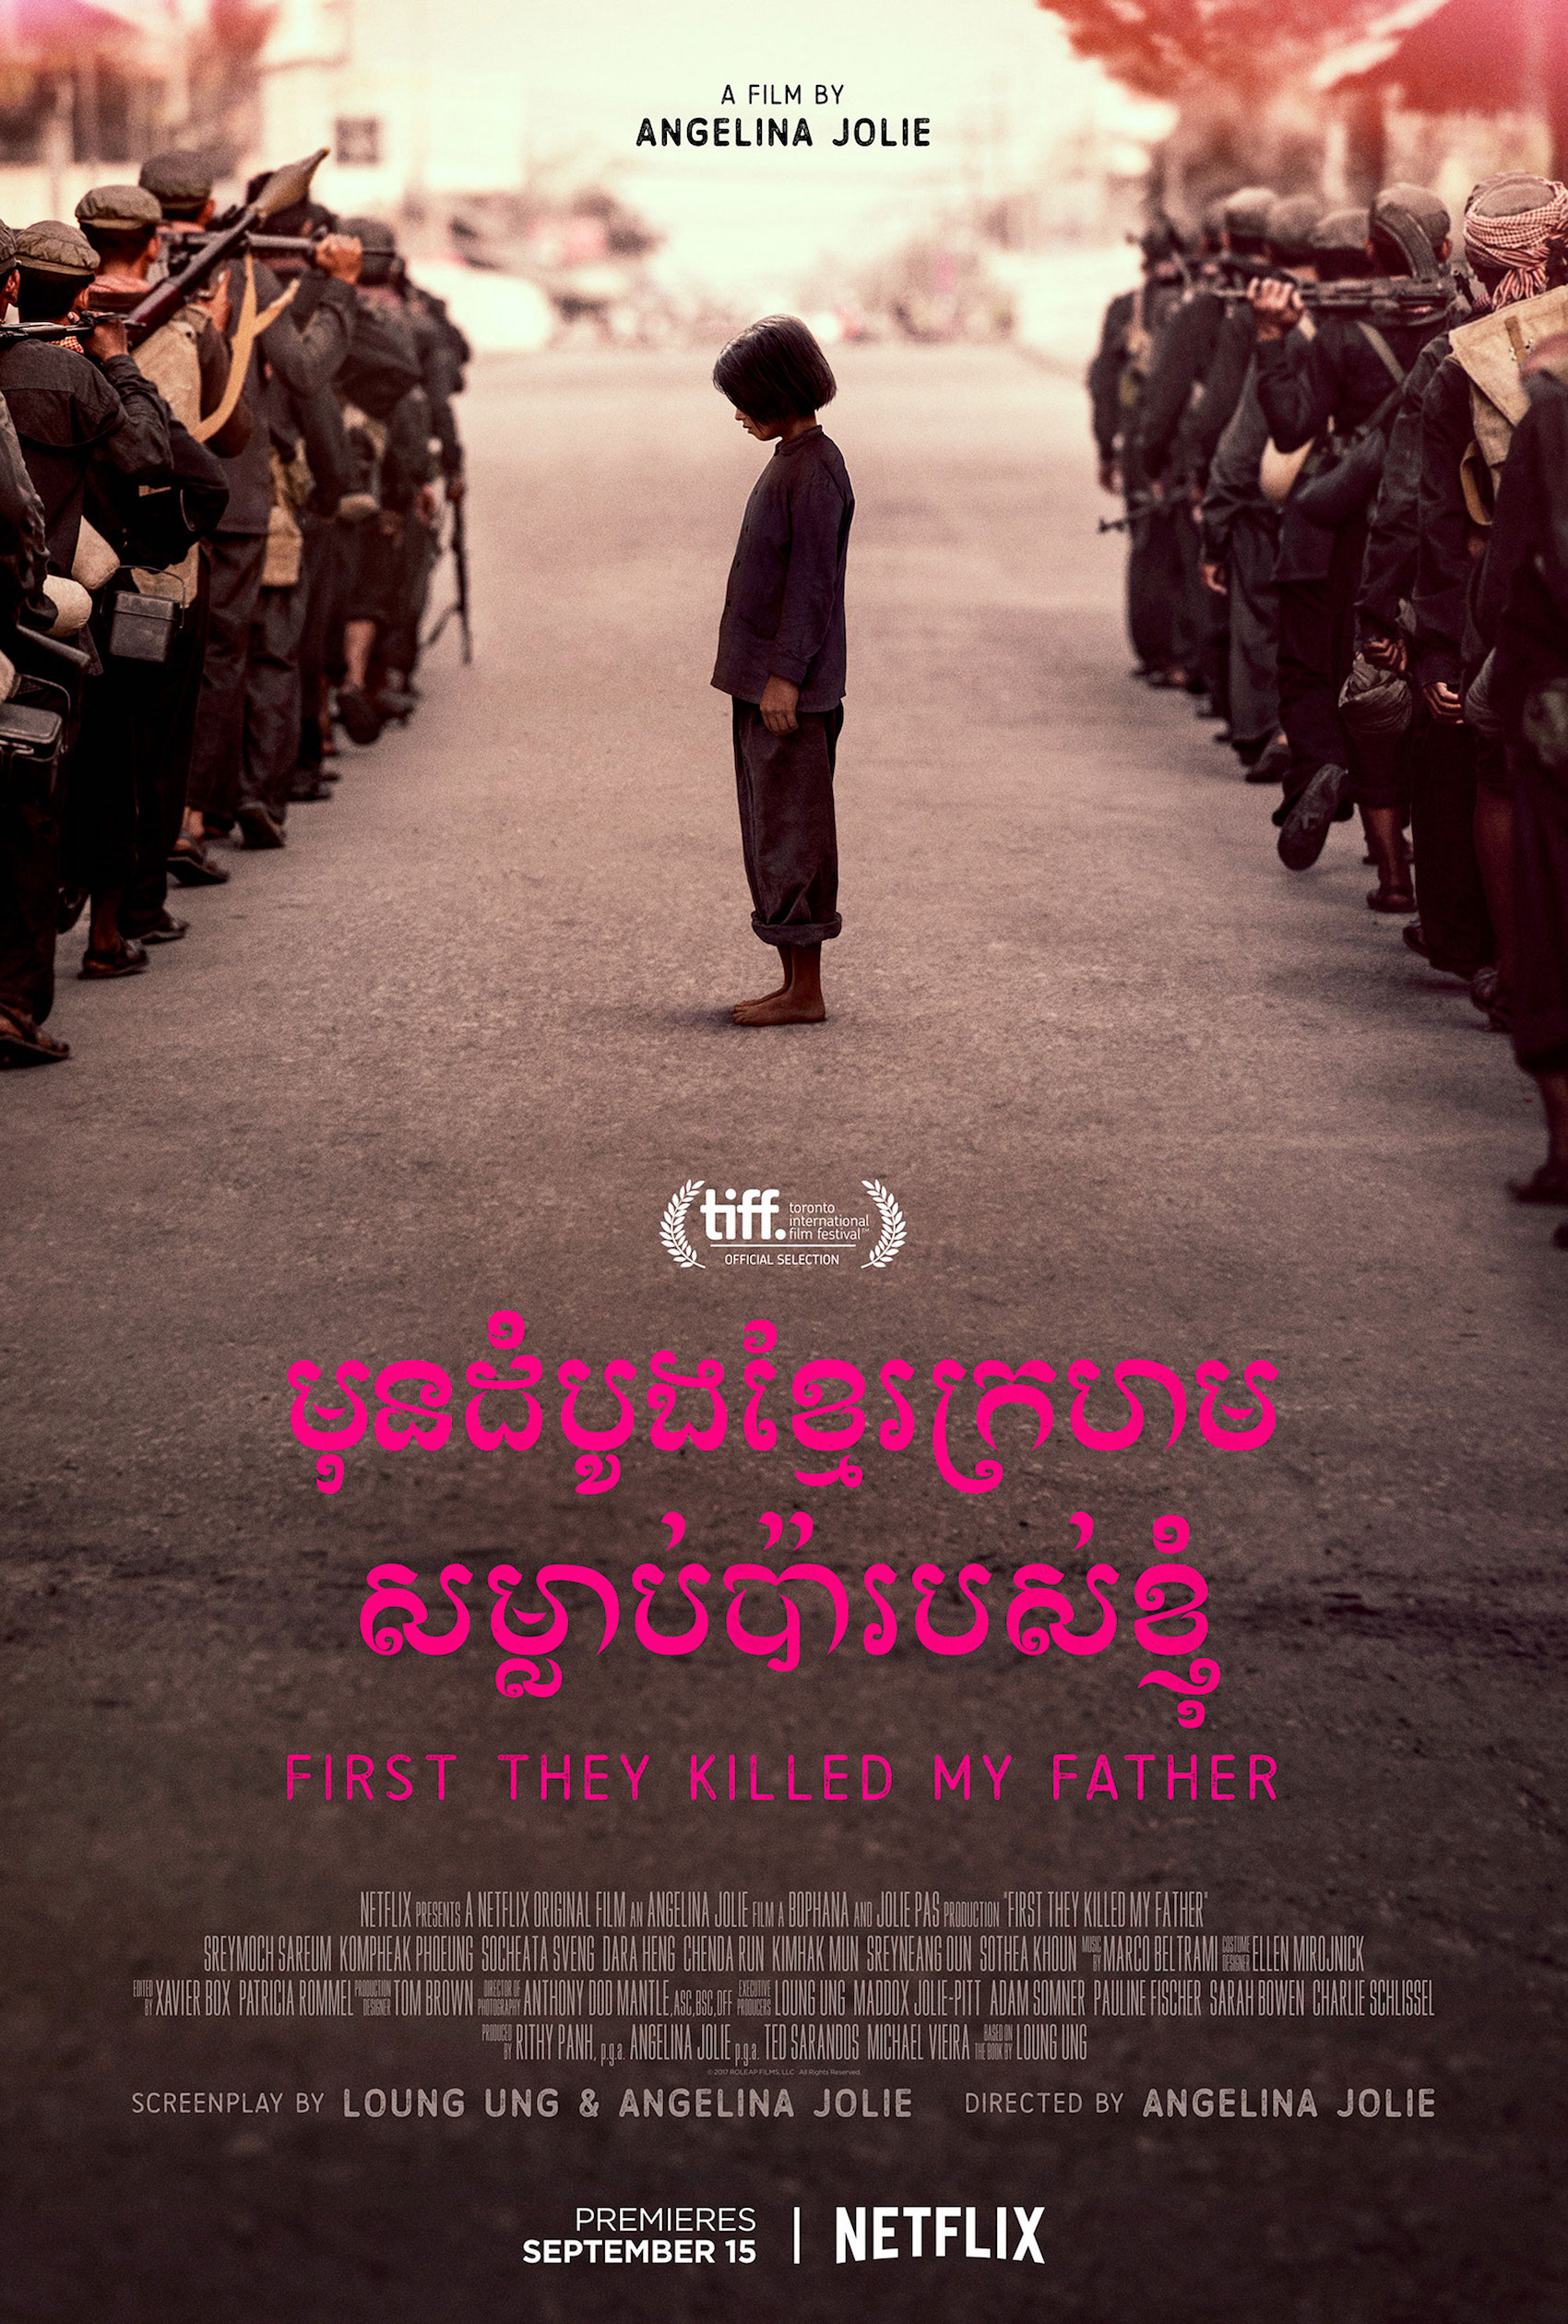 They Killed My Father Movie Poster